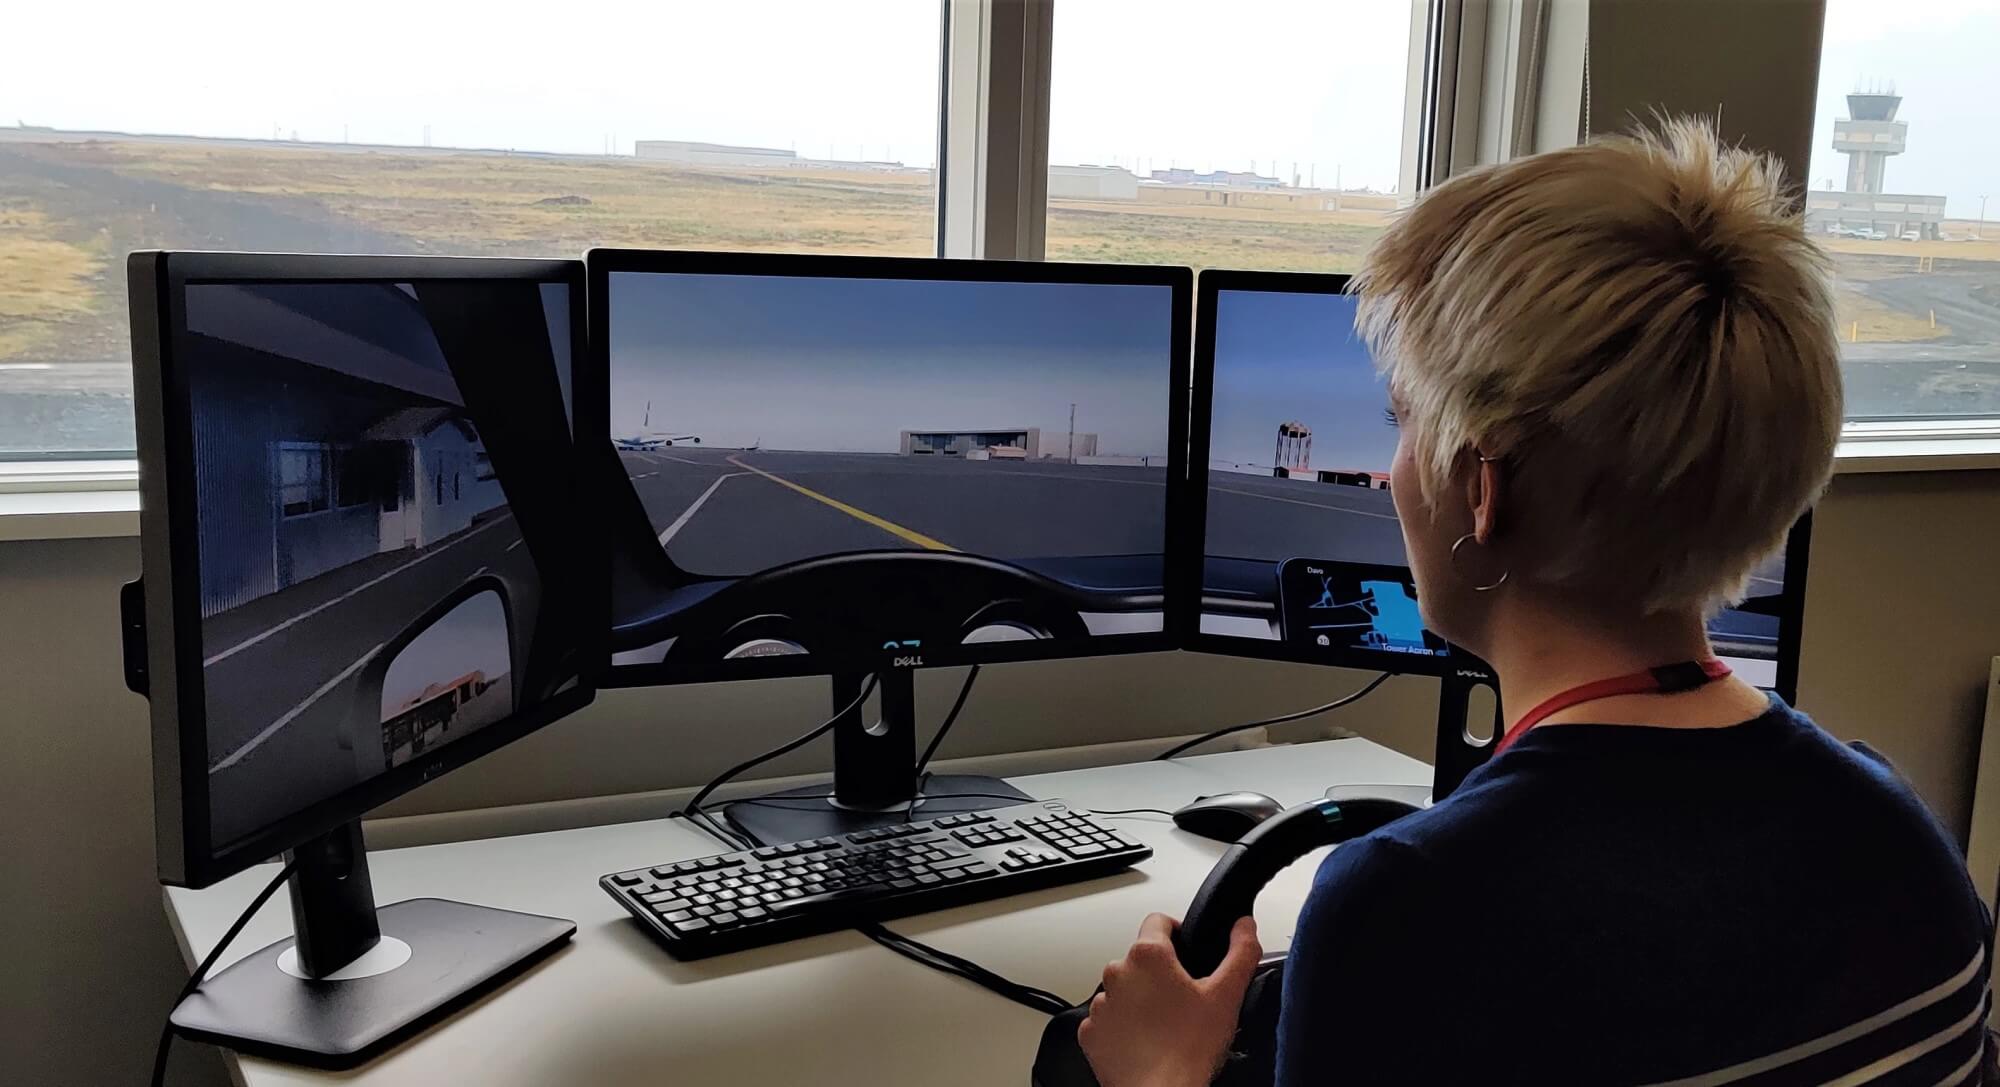 New release of Orion Driving Simulator for Keflavik Airport